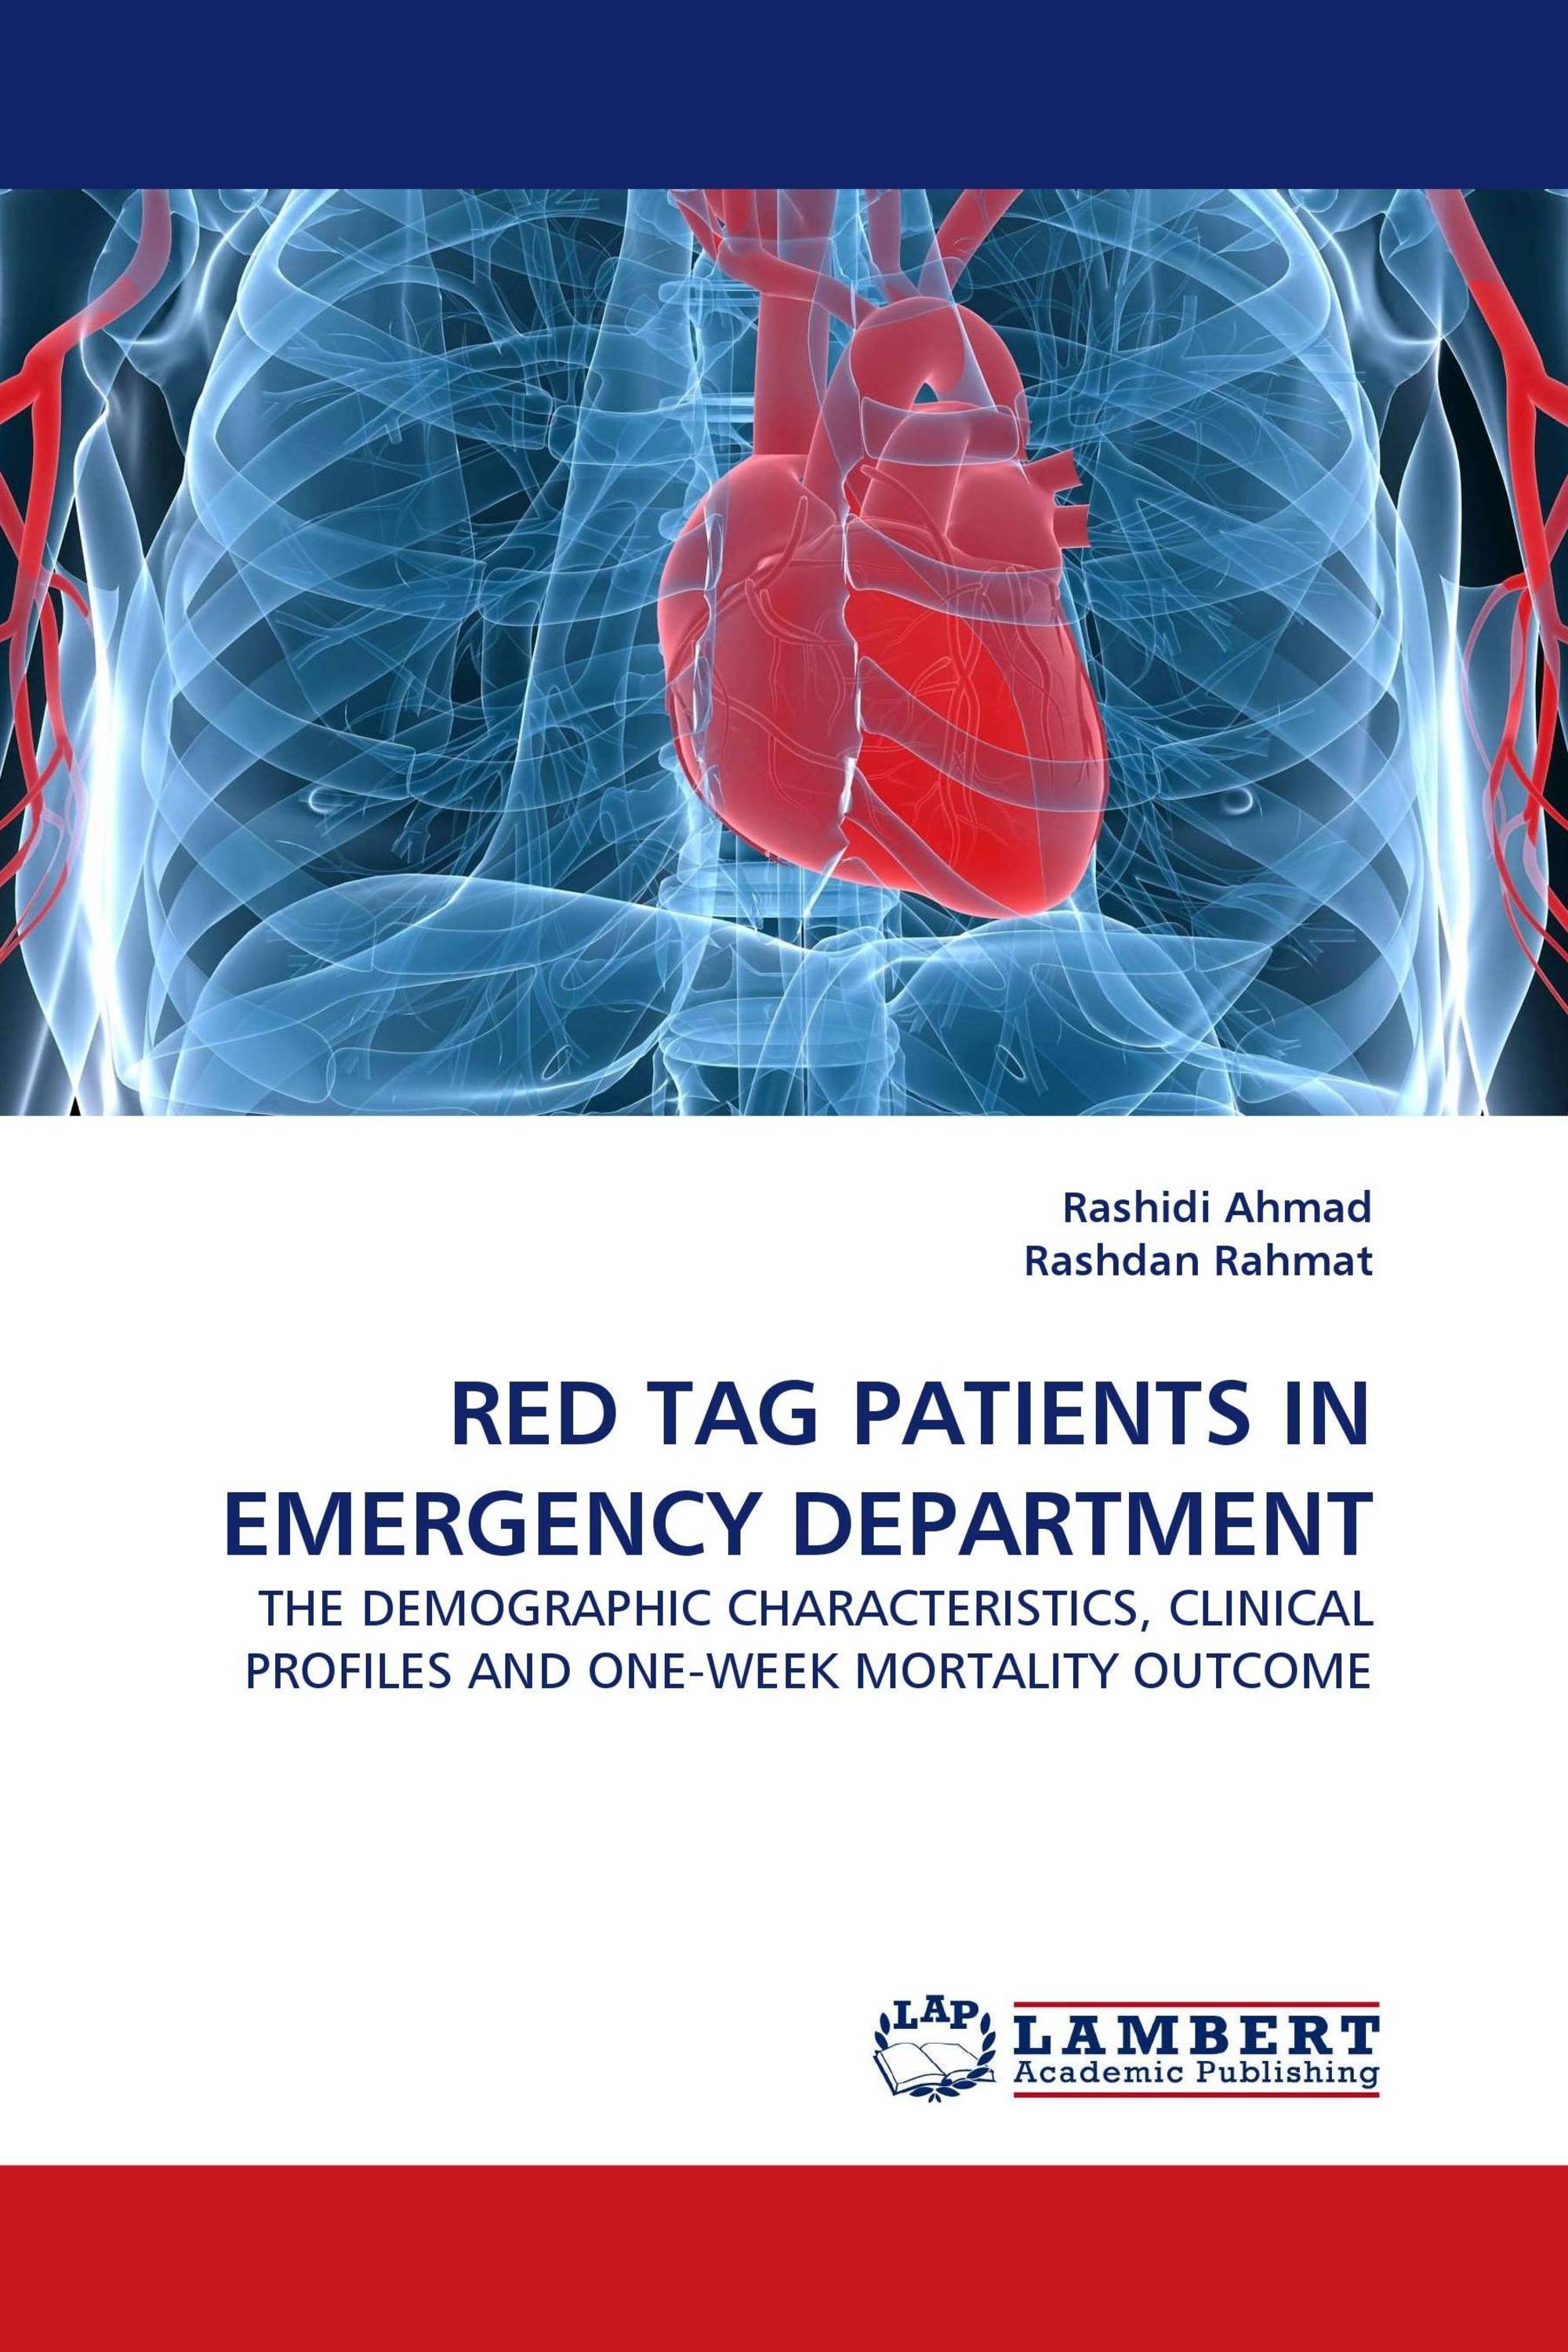 RED TAG PATIENTS IN EMERGENCY DEPARTMENT